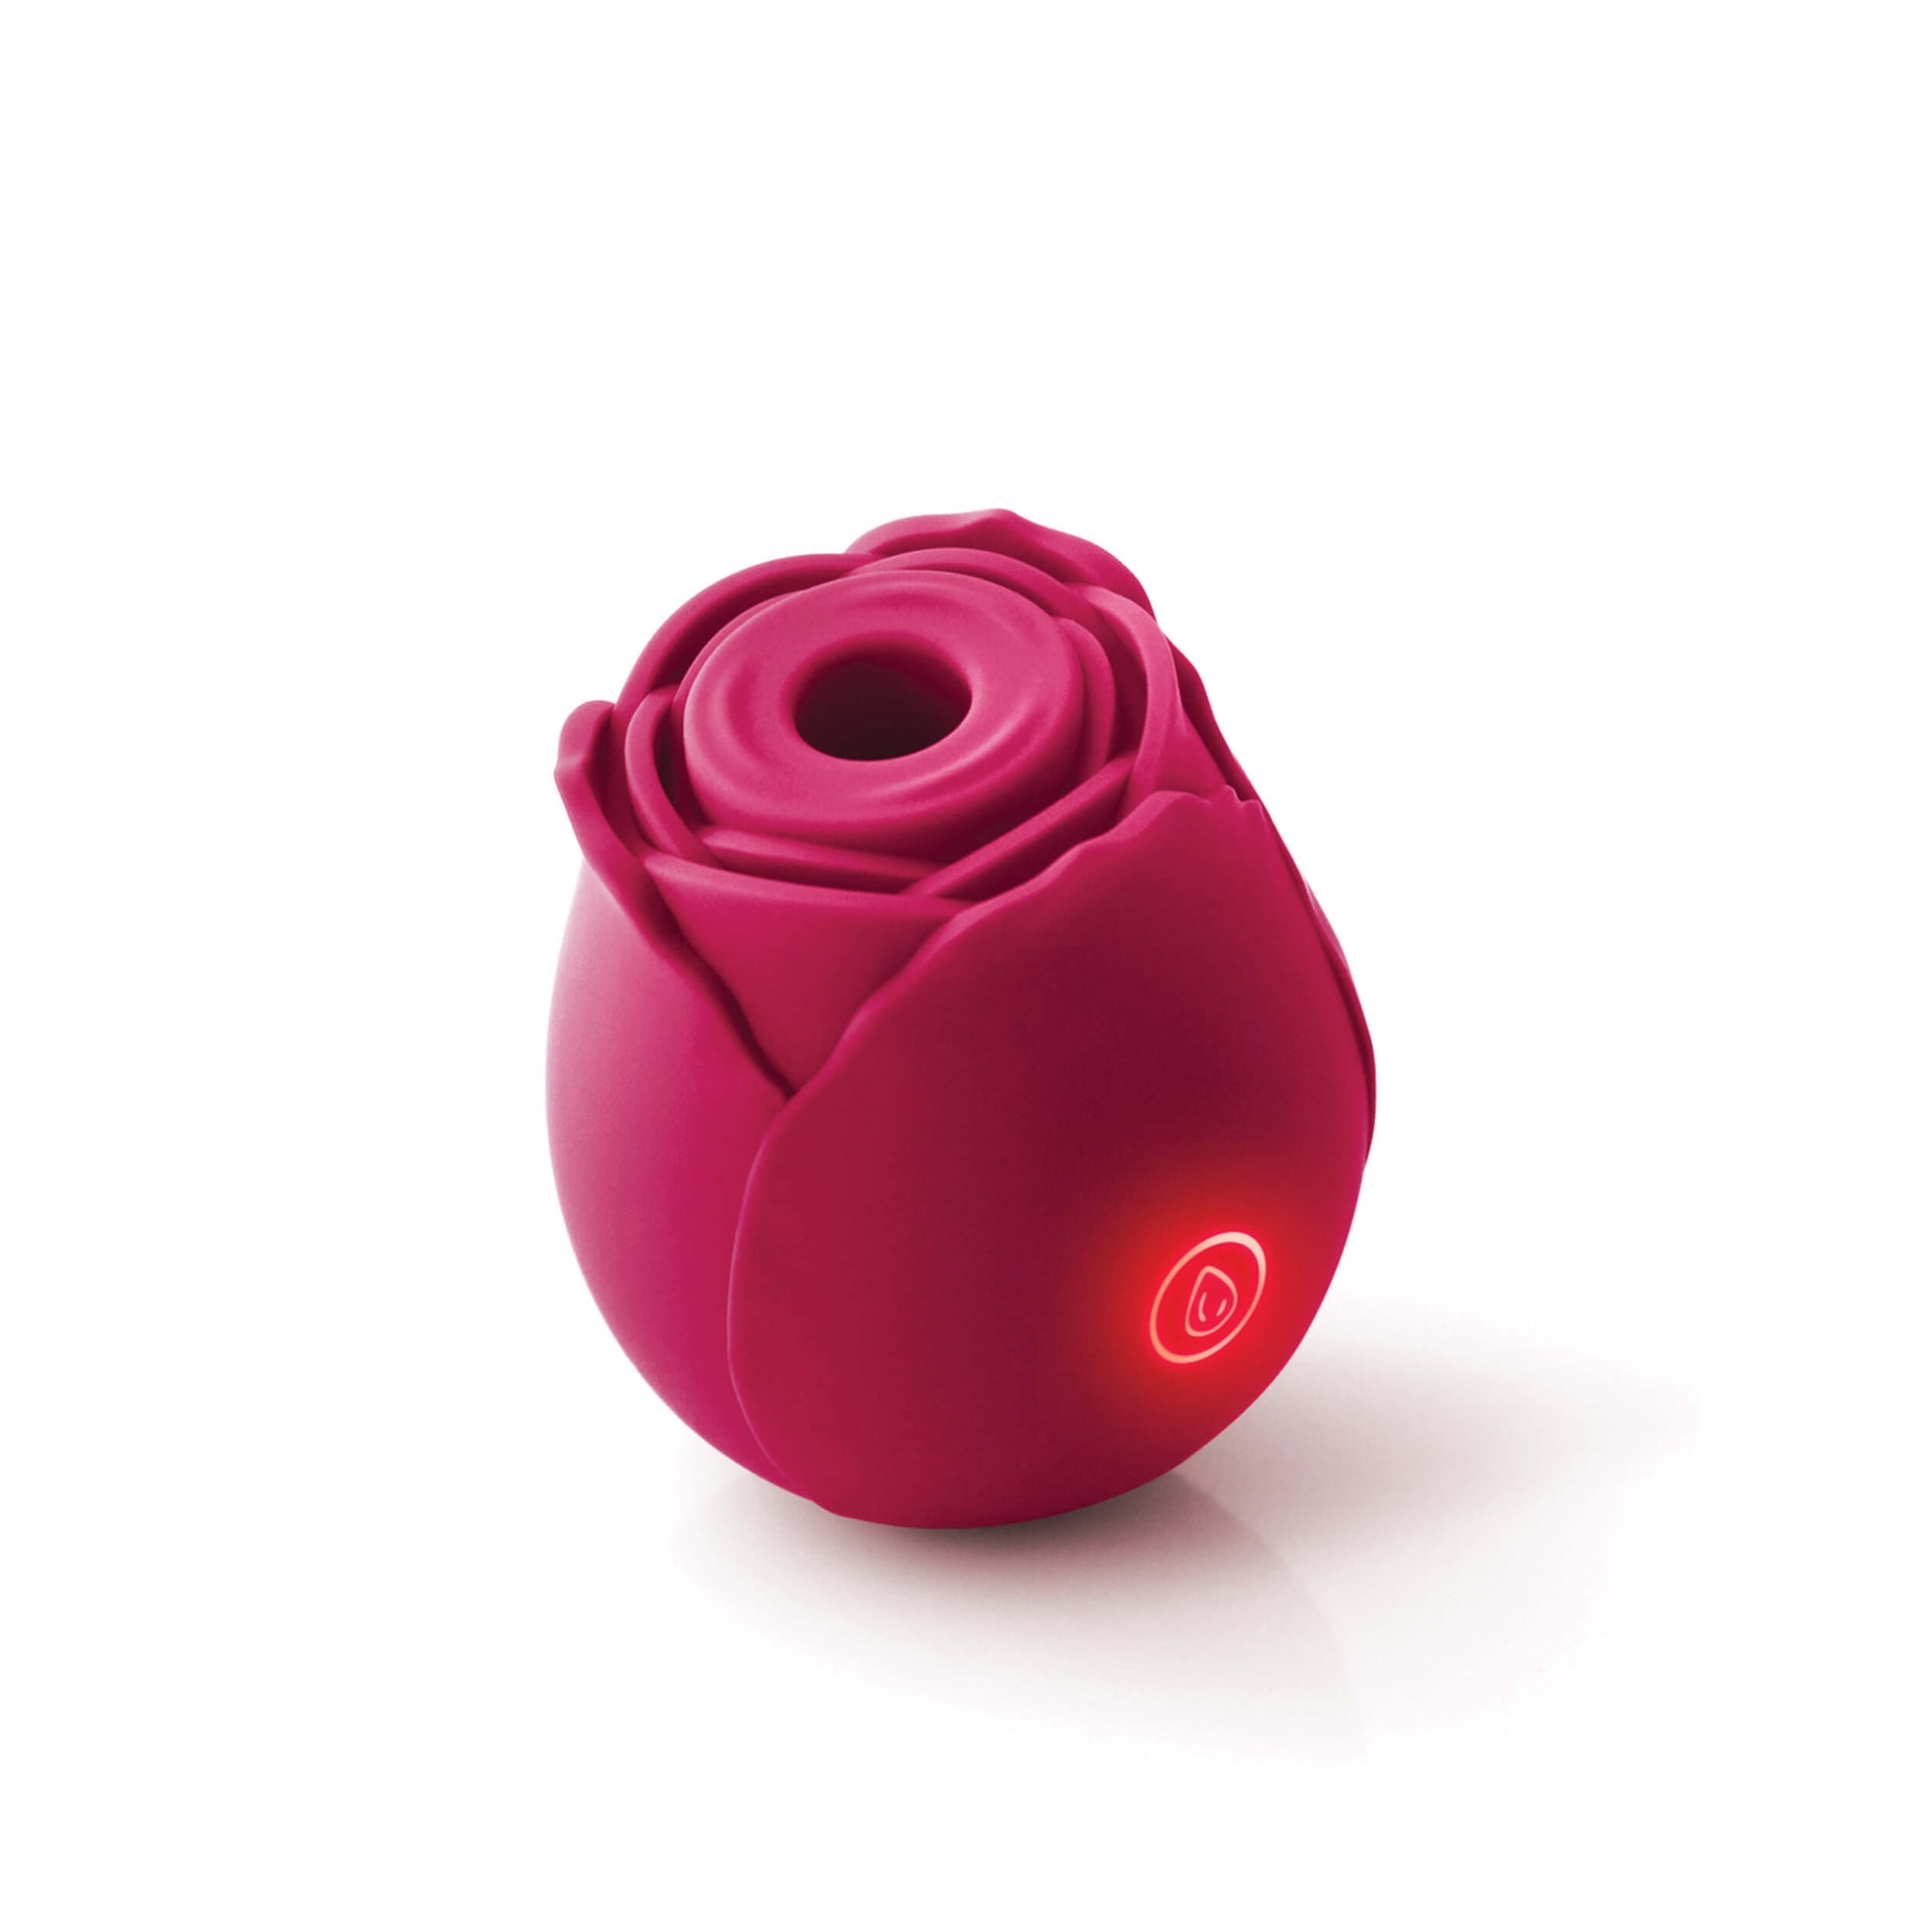 Inya The Rose Suction Vibe - The Bigger O online sex toy shop USA, Canada & UK shipping available